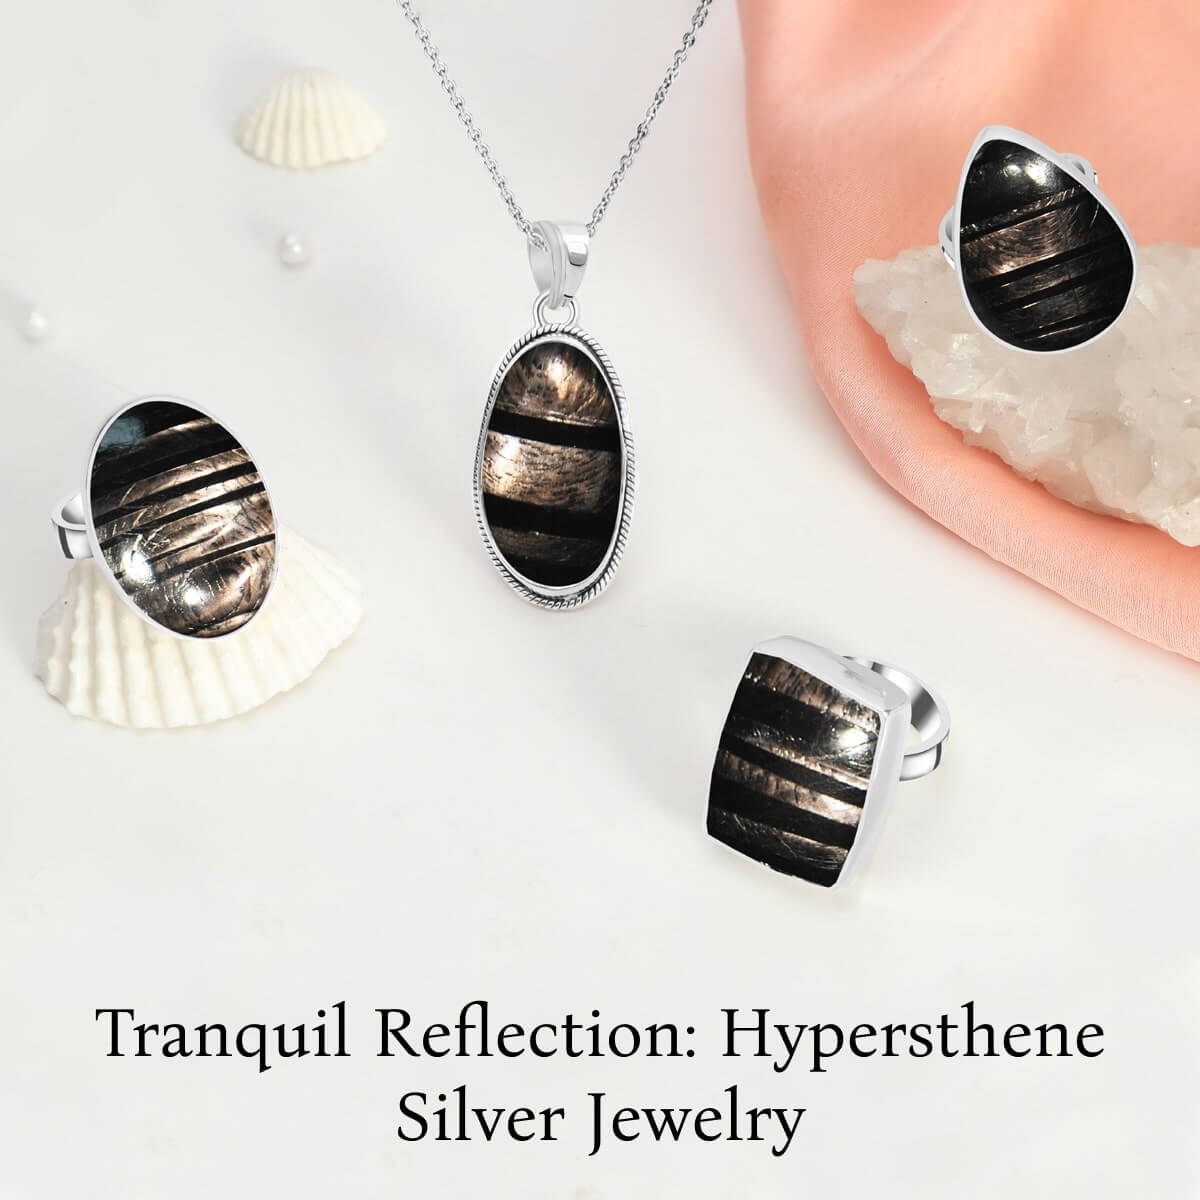 Meditation with Hypersthene Plain Silver Jewelry